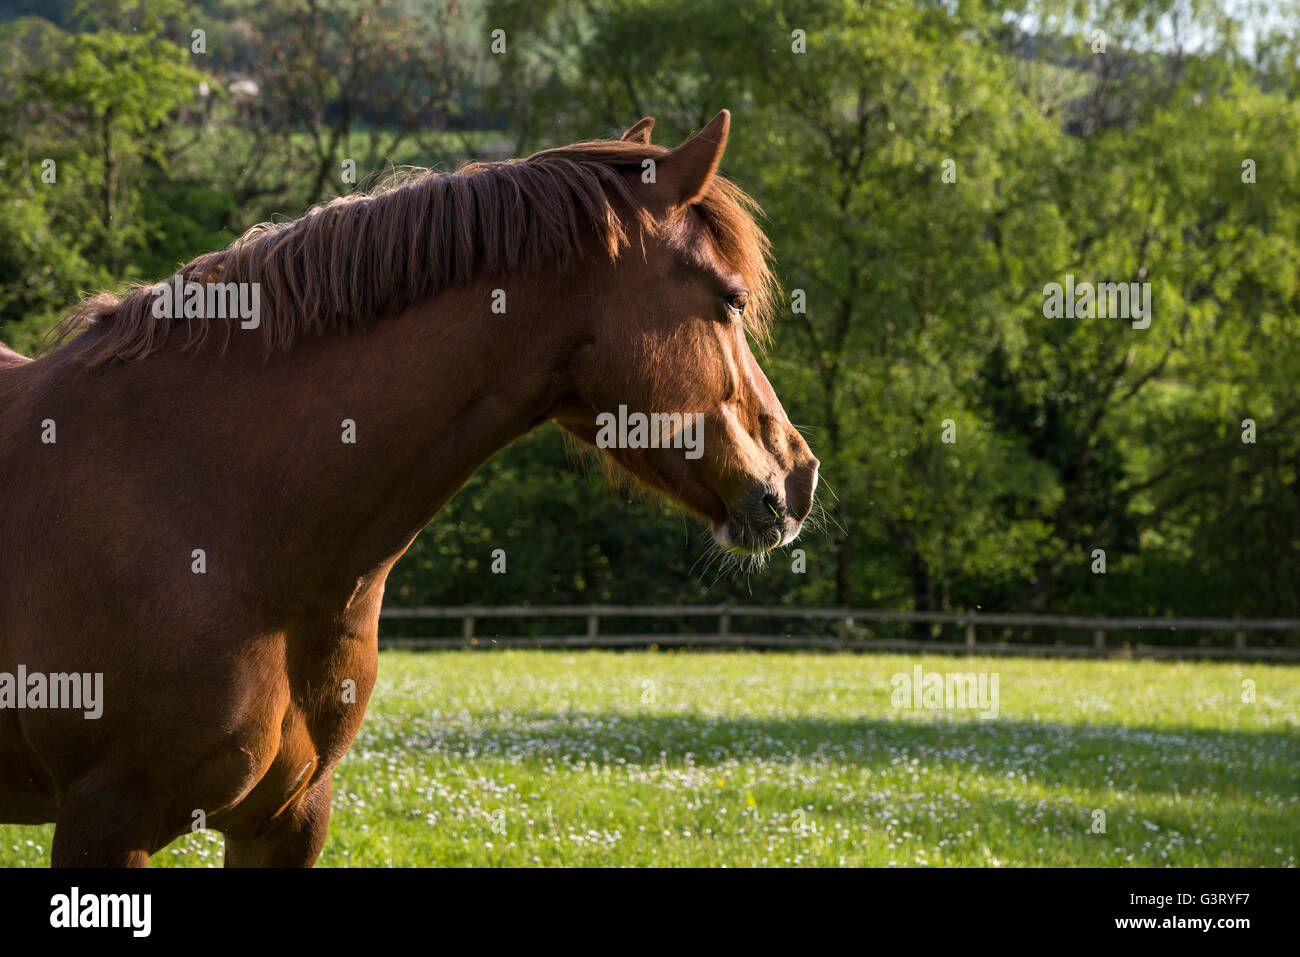 Chestnut pony with head up and ears forward in a summery country landscape. Stock Photo